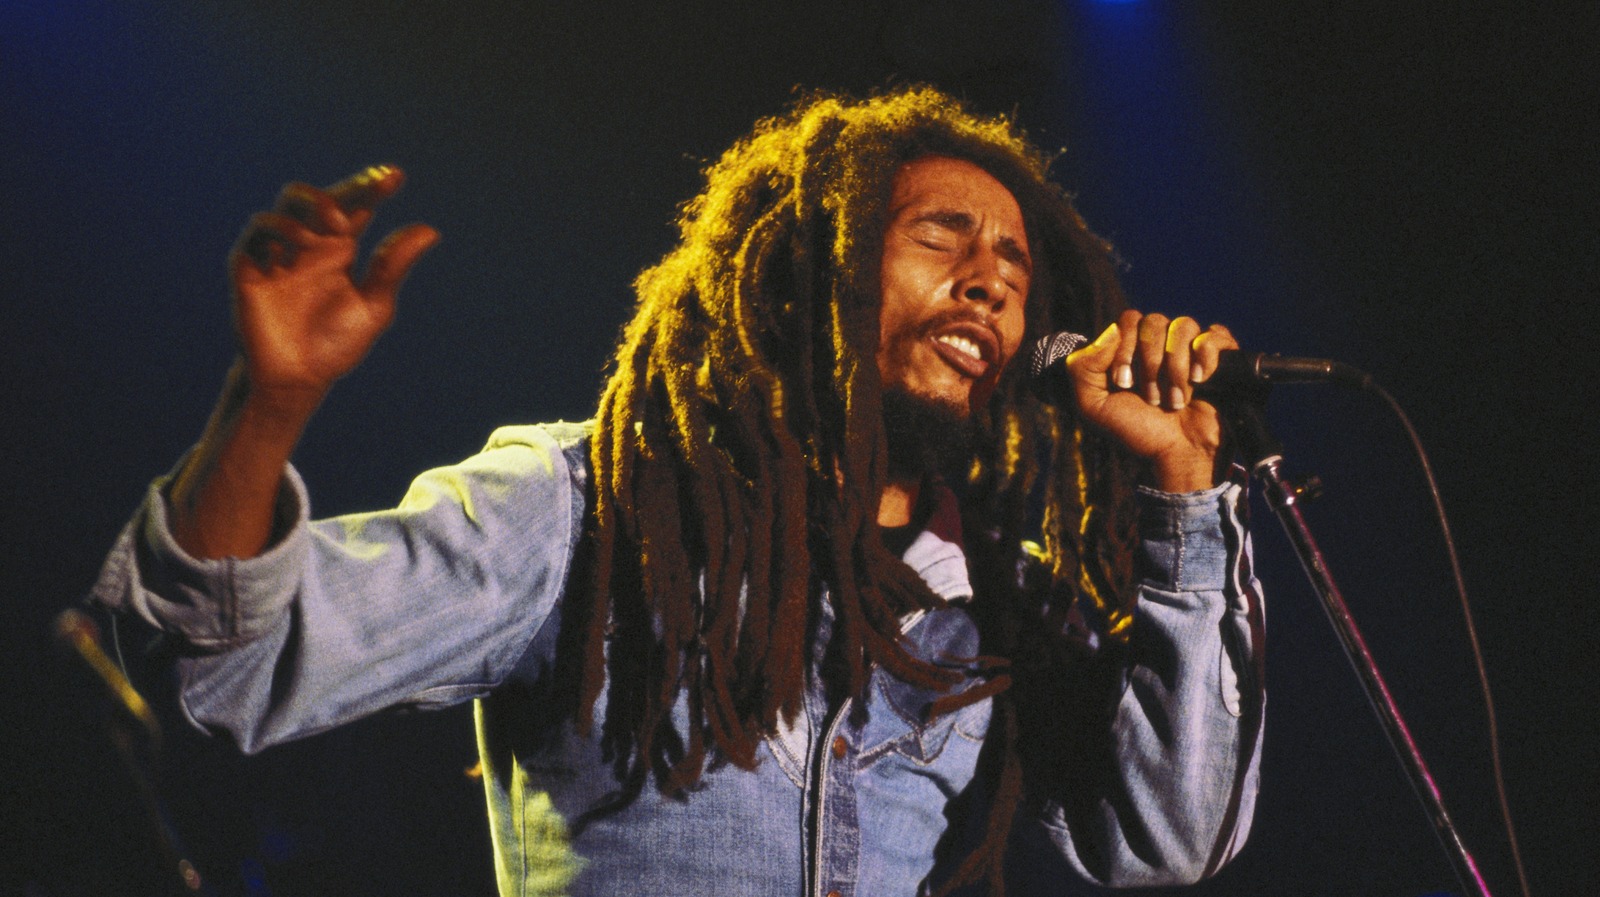 Three Little Birds': The Story Behind Bob Marley's Slow-Burning Classic